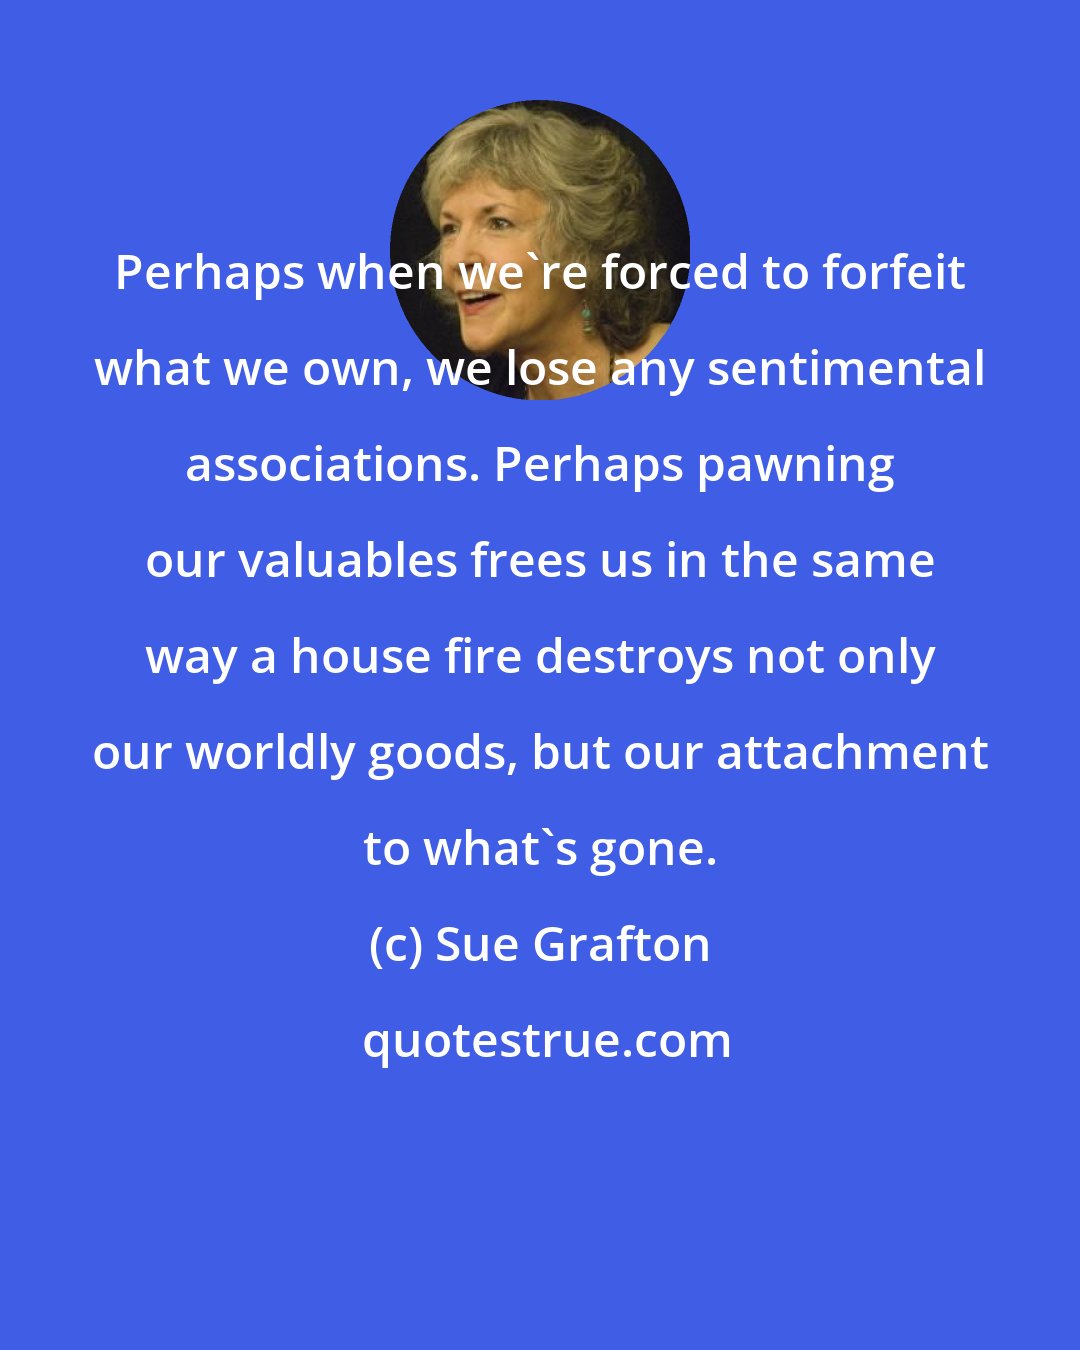 Sue Grafton: Perhaps when we're forced to forfeit what we own, we lose any sentimental associations. Perhaps pawning our valuables frees us in the same way a house fire destroys not only our worldly goods, but our attachment to what's gone.